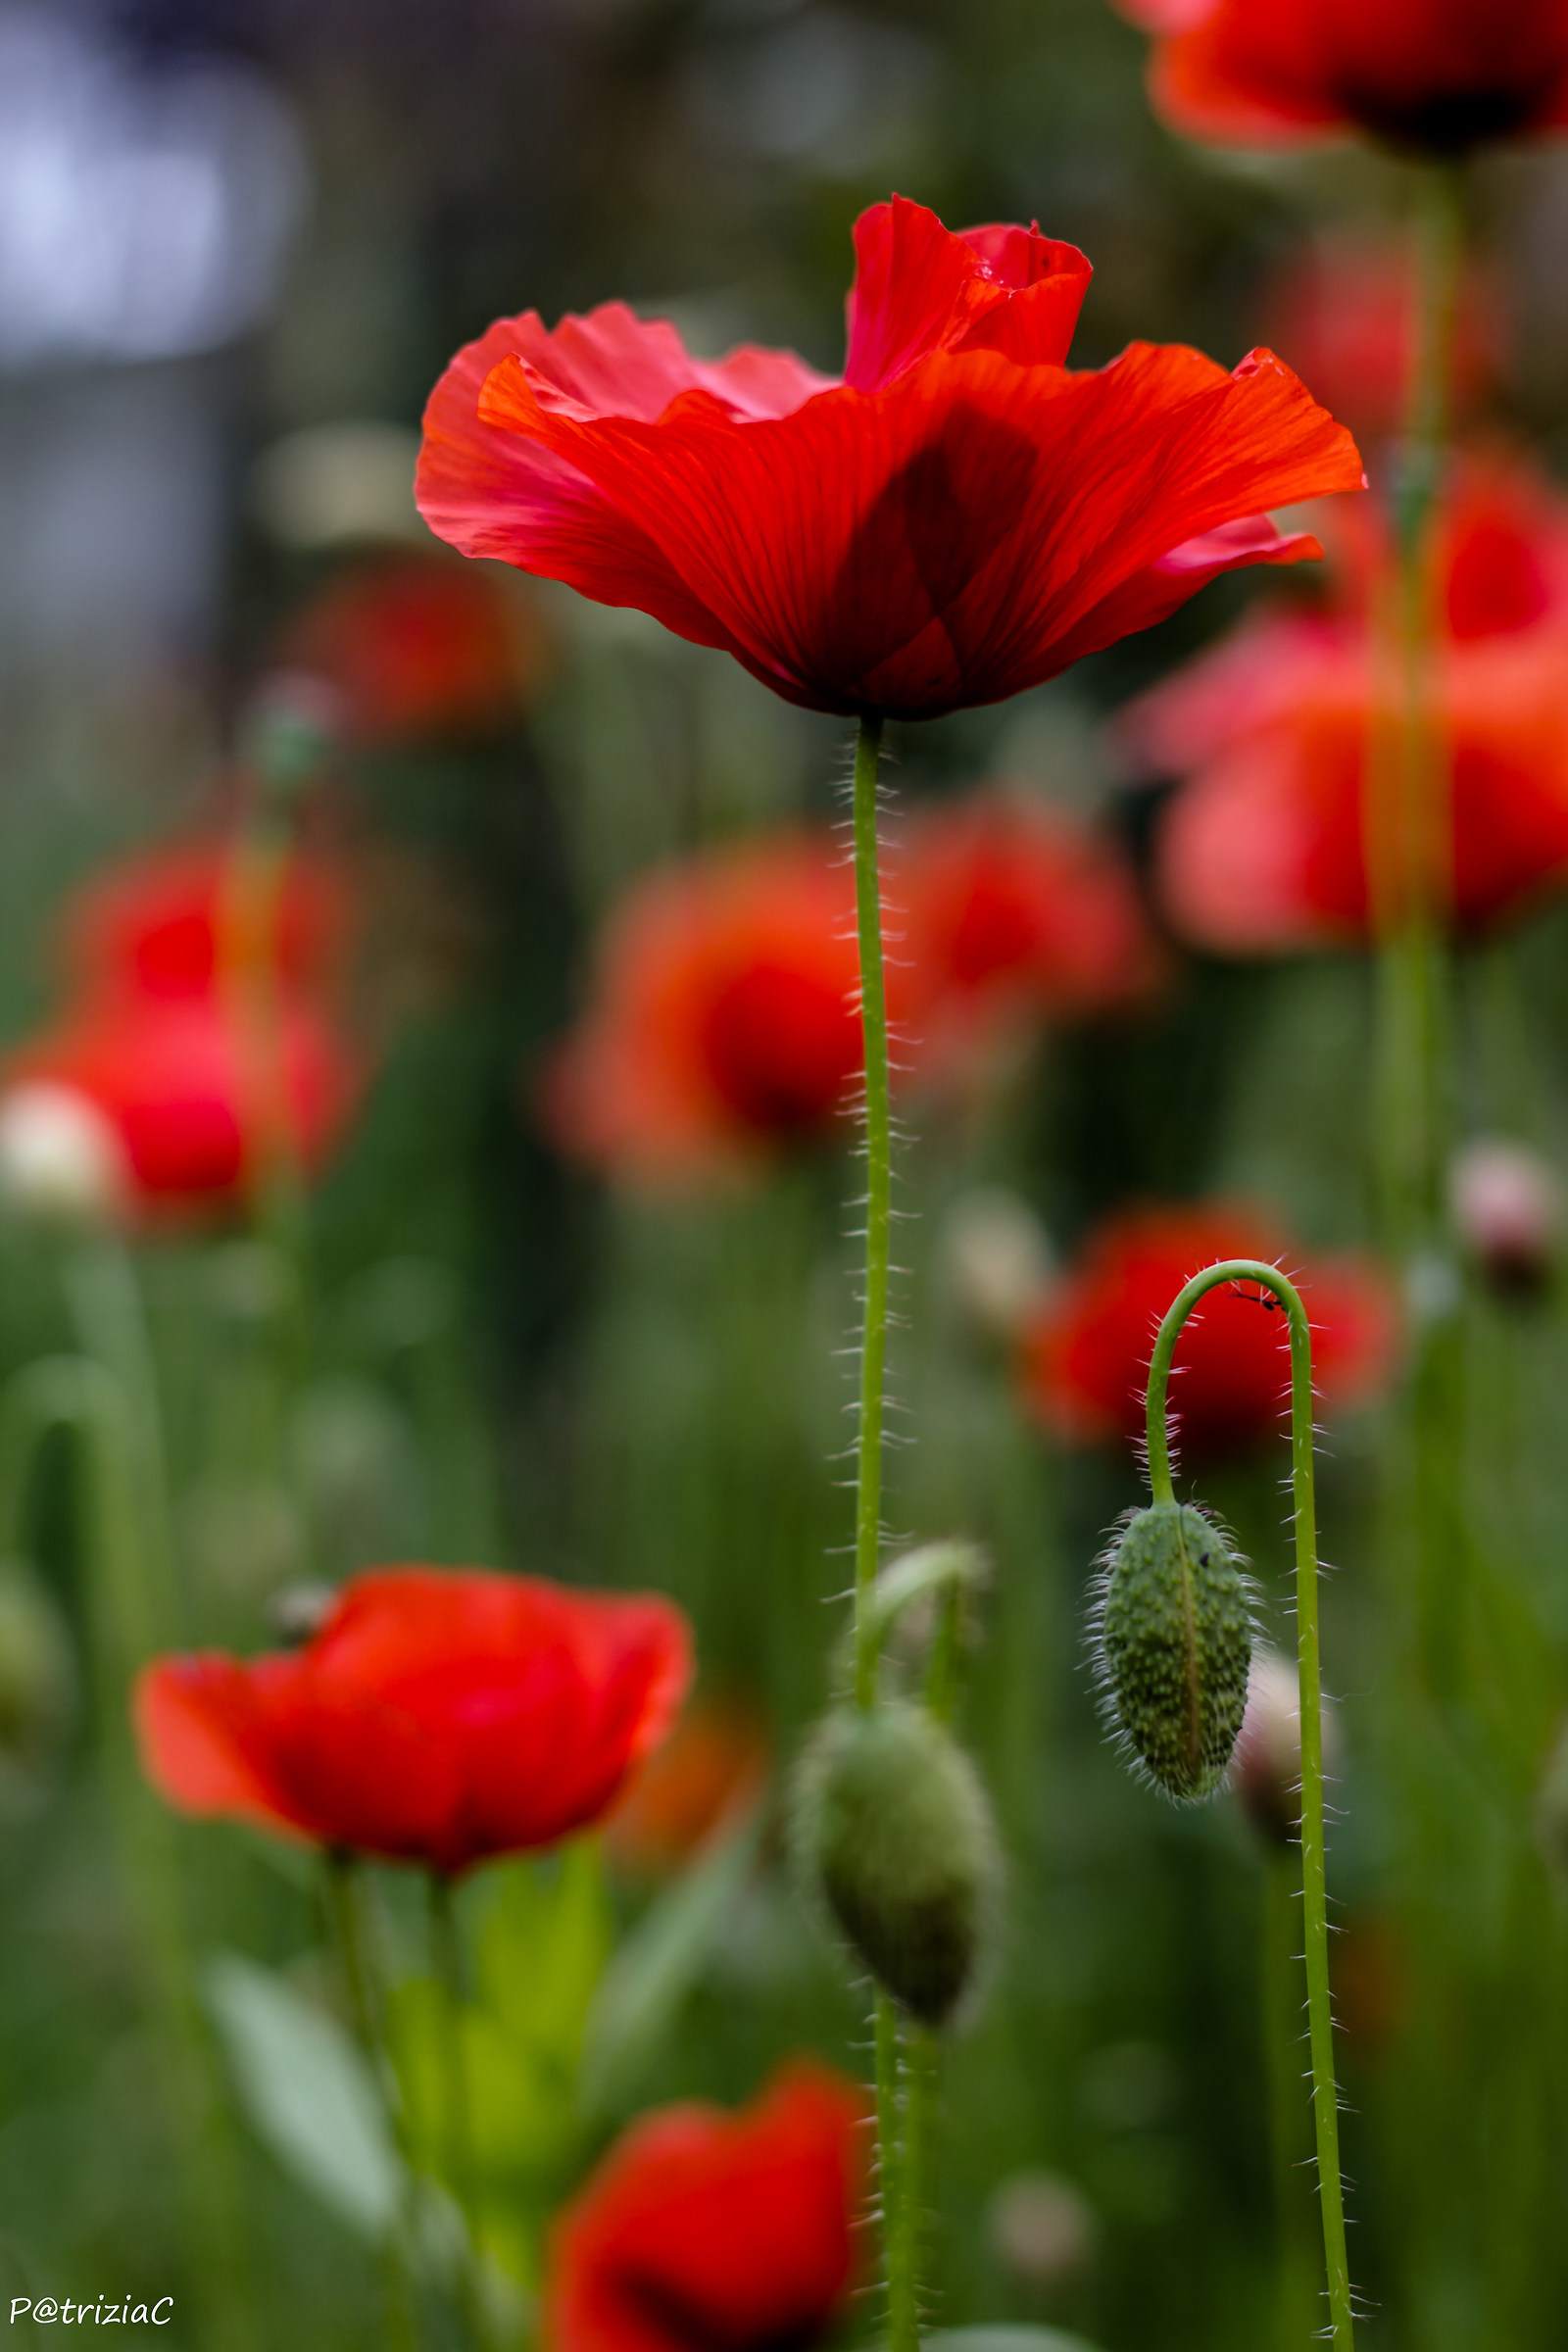 ... Is poppy time ......